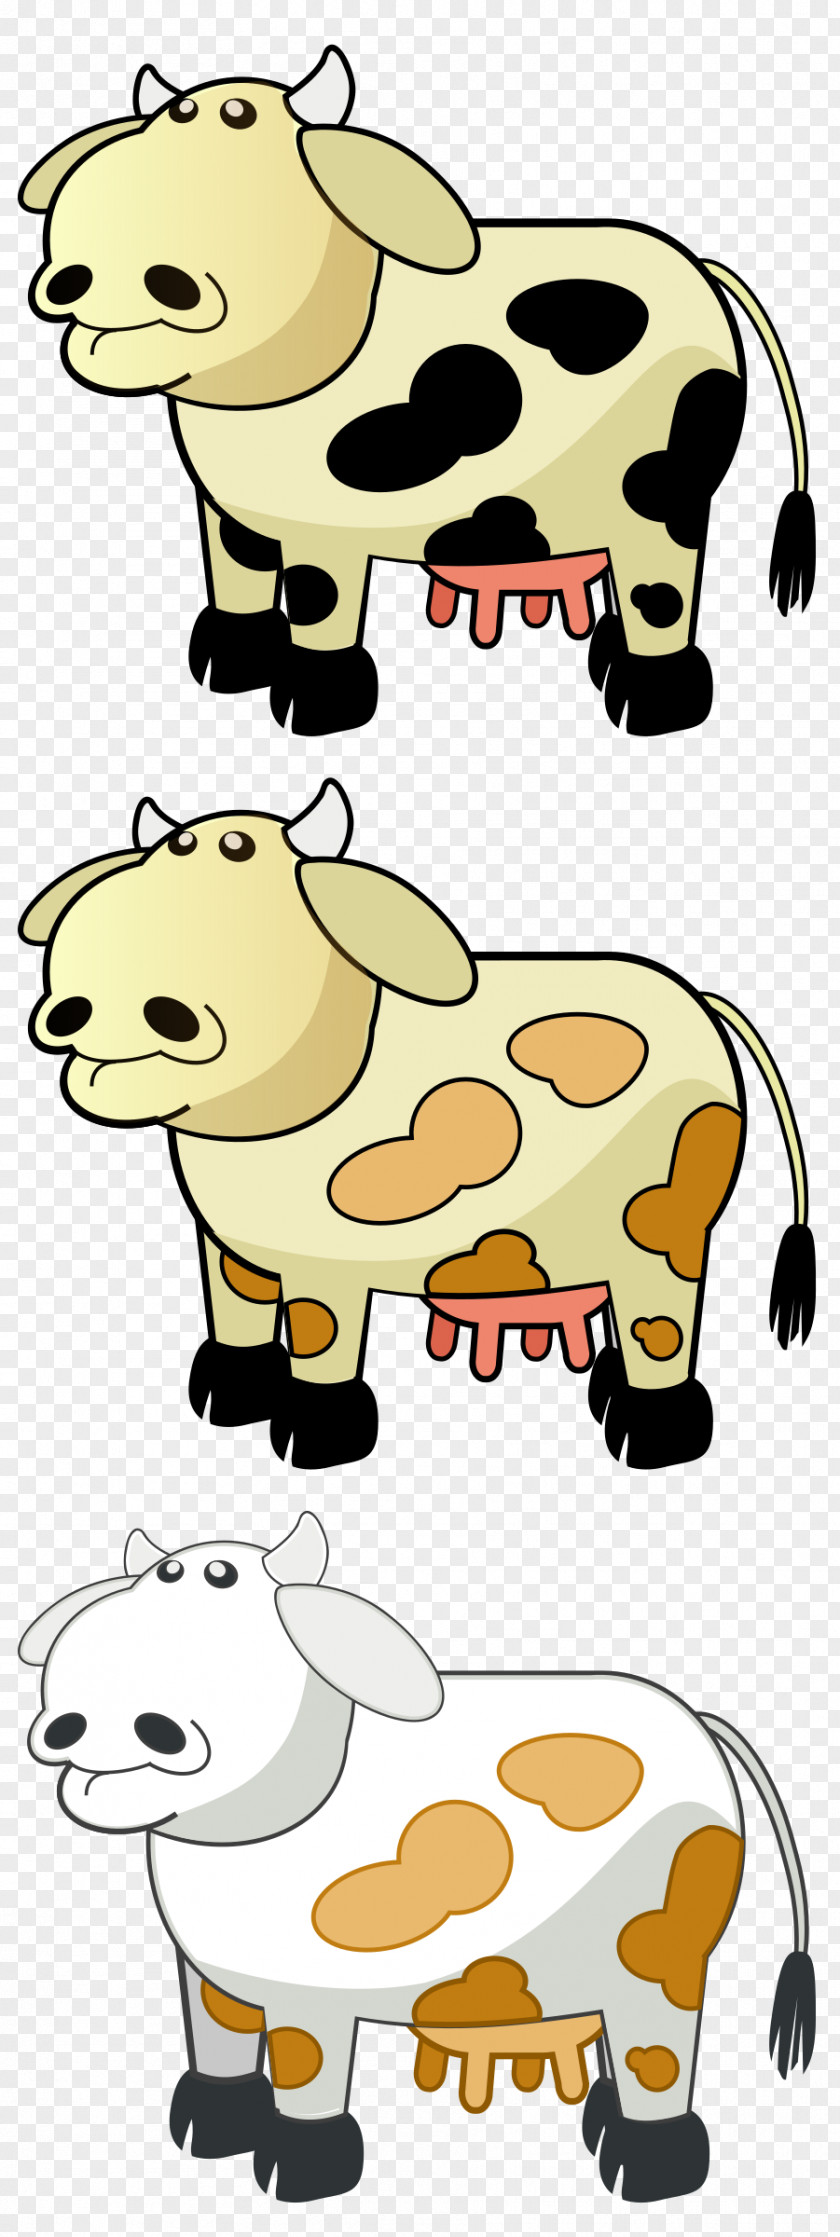 Cow Beef Cattle Calf Dairy Farming Clip Art PNG